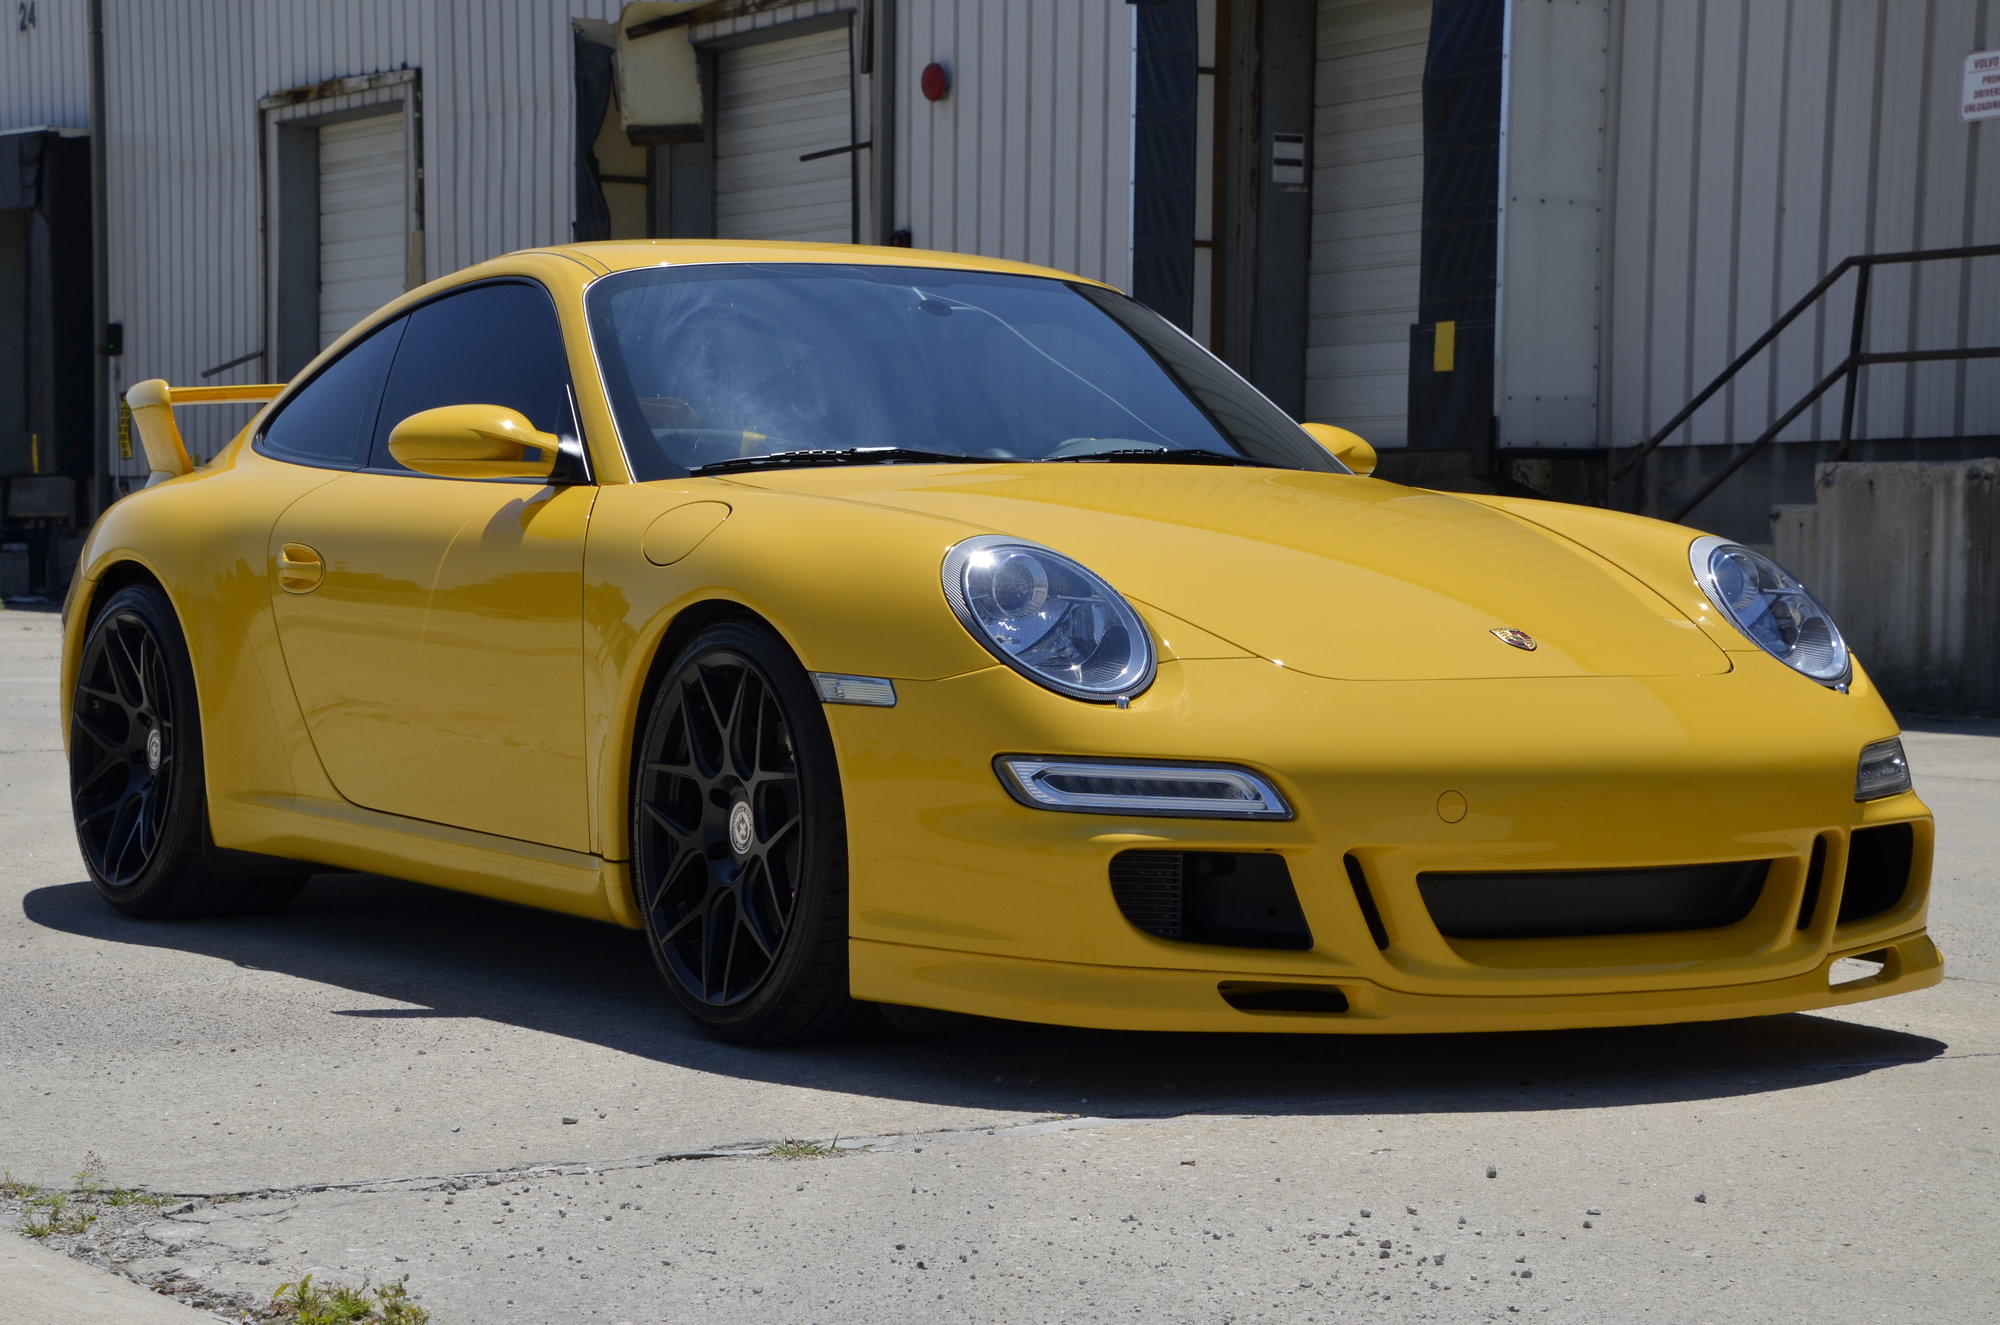 2007 Porsche 911 - 2007 Porsche 997 AERO KIT car Speed Yellow - Used - VIN WP0AA29957S710332 - 21,500 Miles - 6 cyl - 2WD - Manual - Coupe - Yellow - Columbus, OH 43230, United States